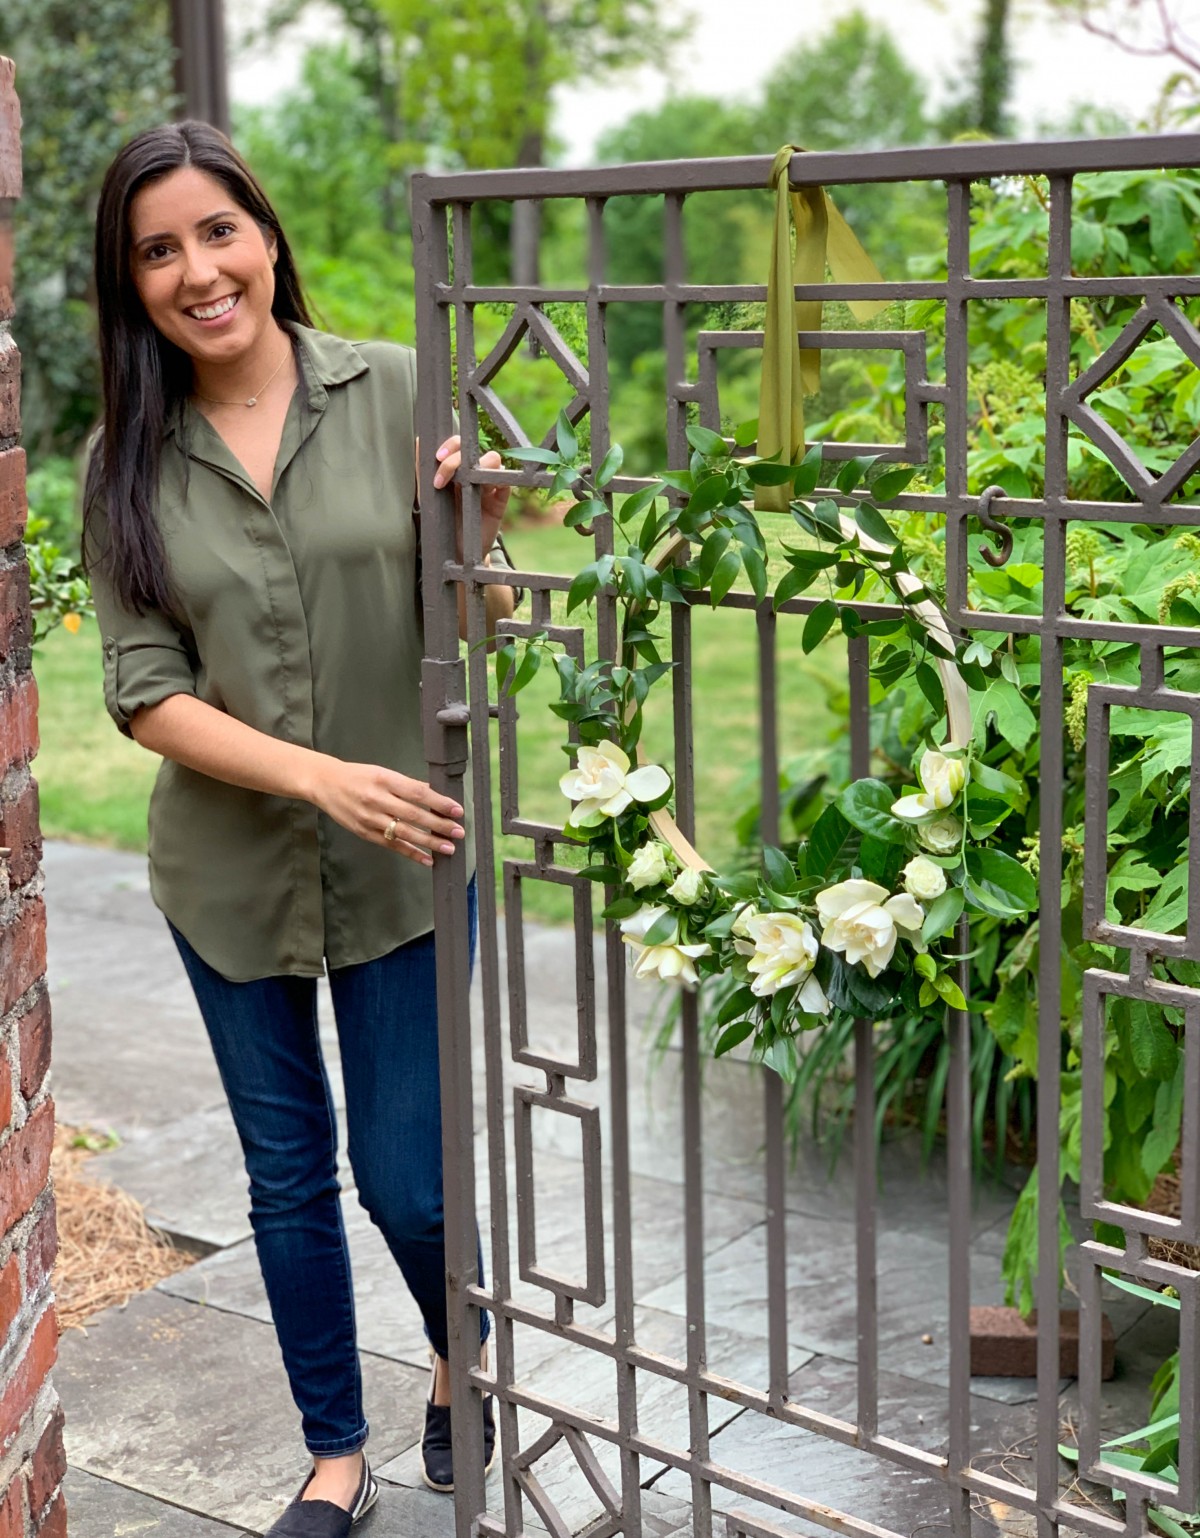 Jessica Cohen stands at a wrought iron gate decorated with a floral hoop of gardenias, spray roses, and Italian ruscus